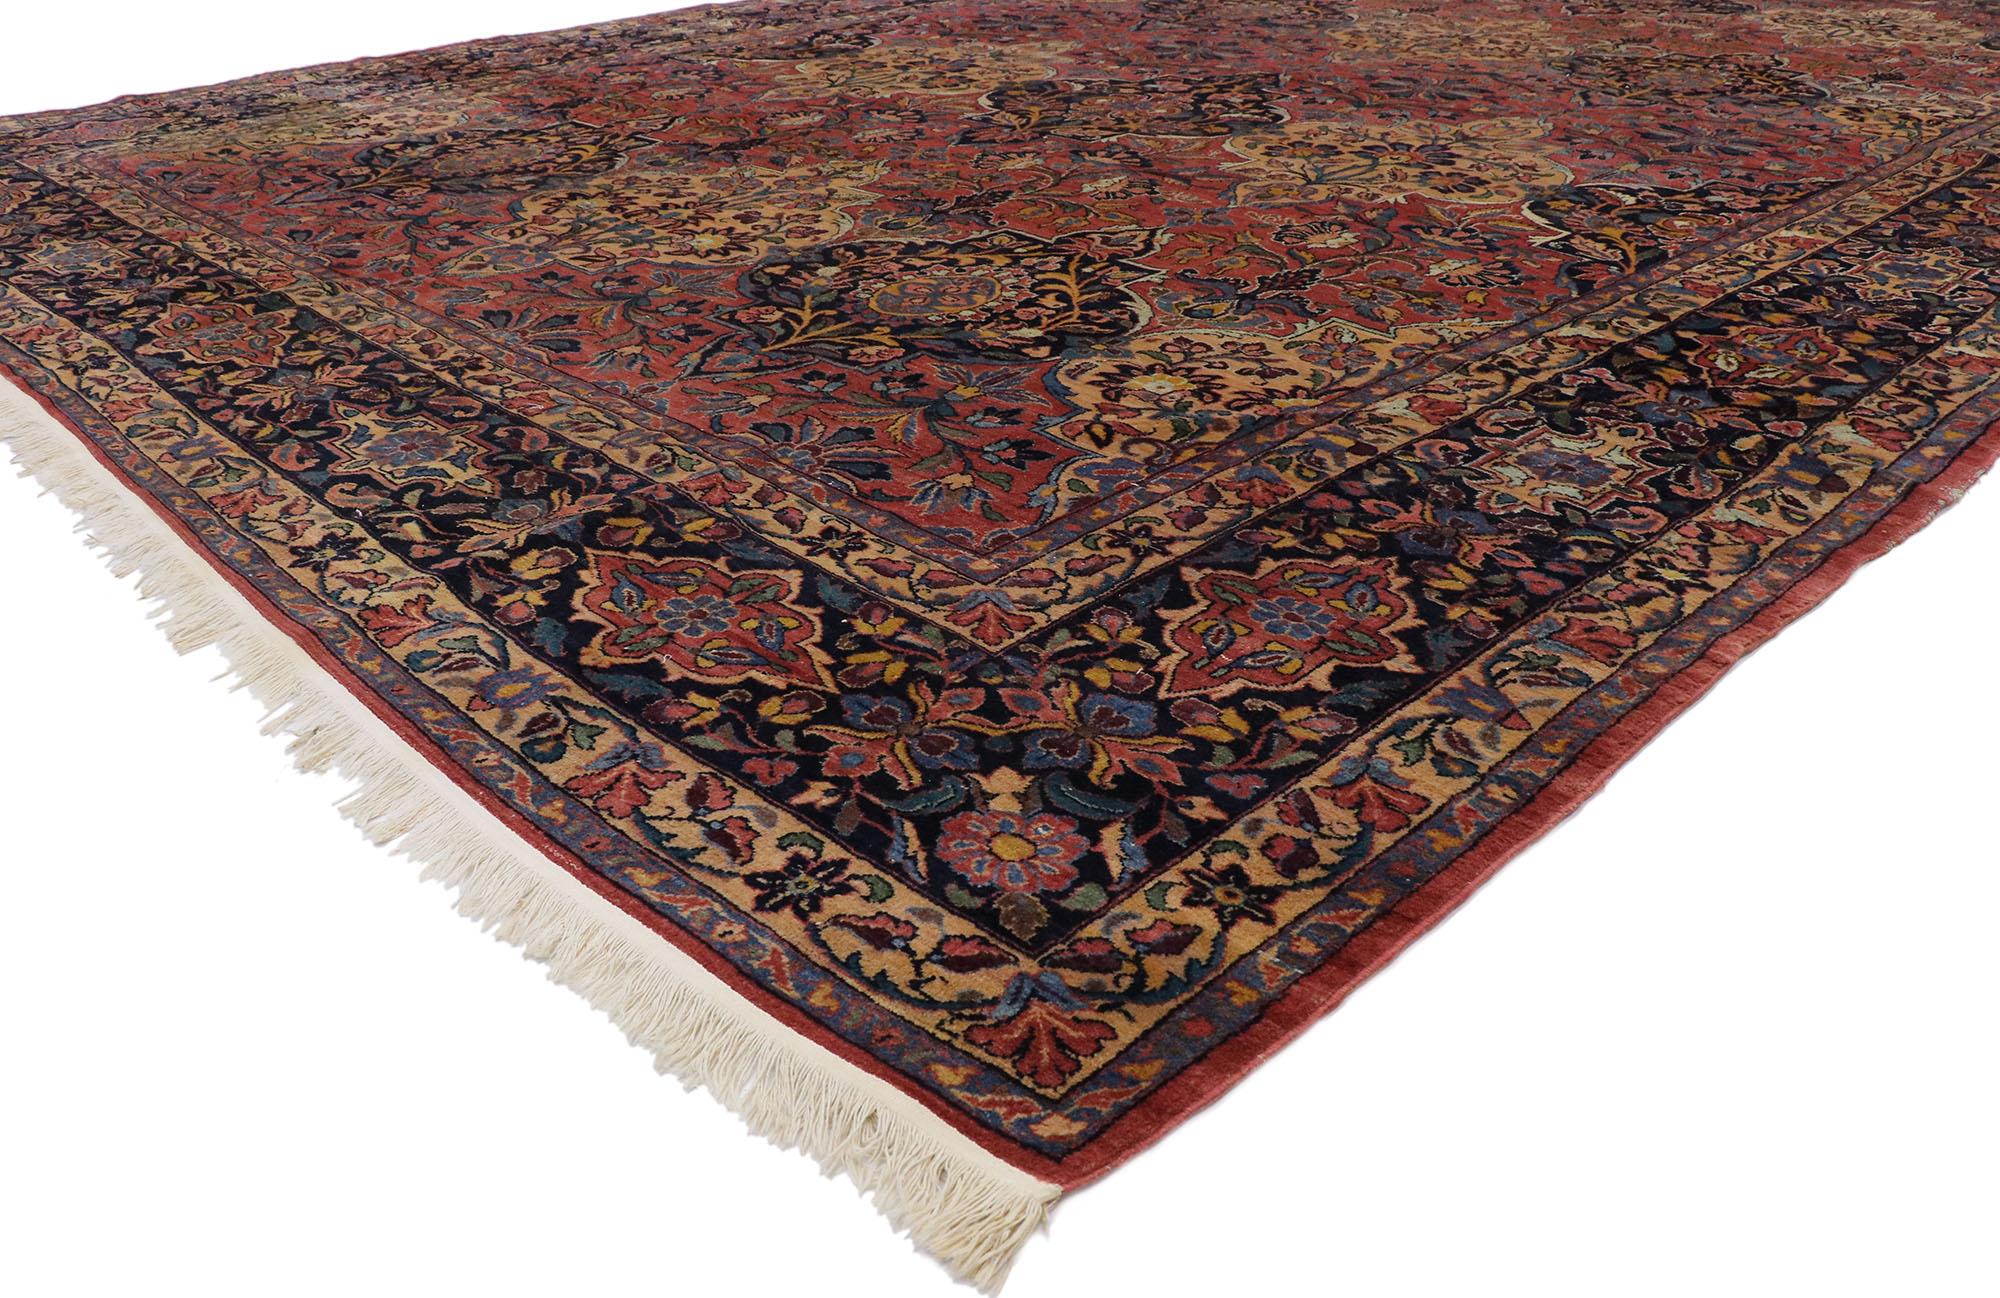 77565, antique Persian Lilihan rug with Victorian Renaissance style. Rich in color with beguiling beauty, this hand knotted wool antique Persian Lilihan rug beautifully embodies Victorian Renaissance style. The composition features an all-over